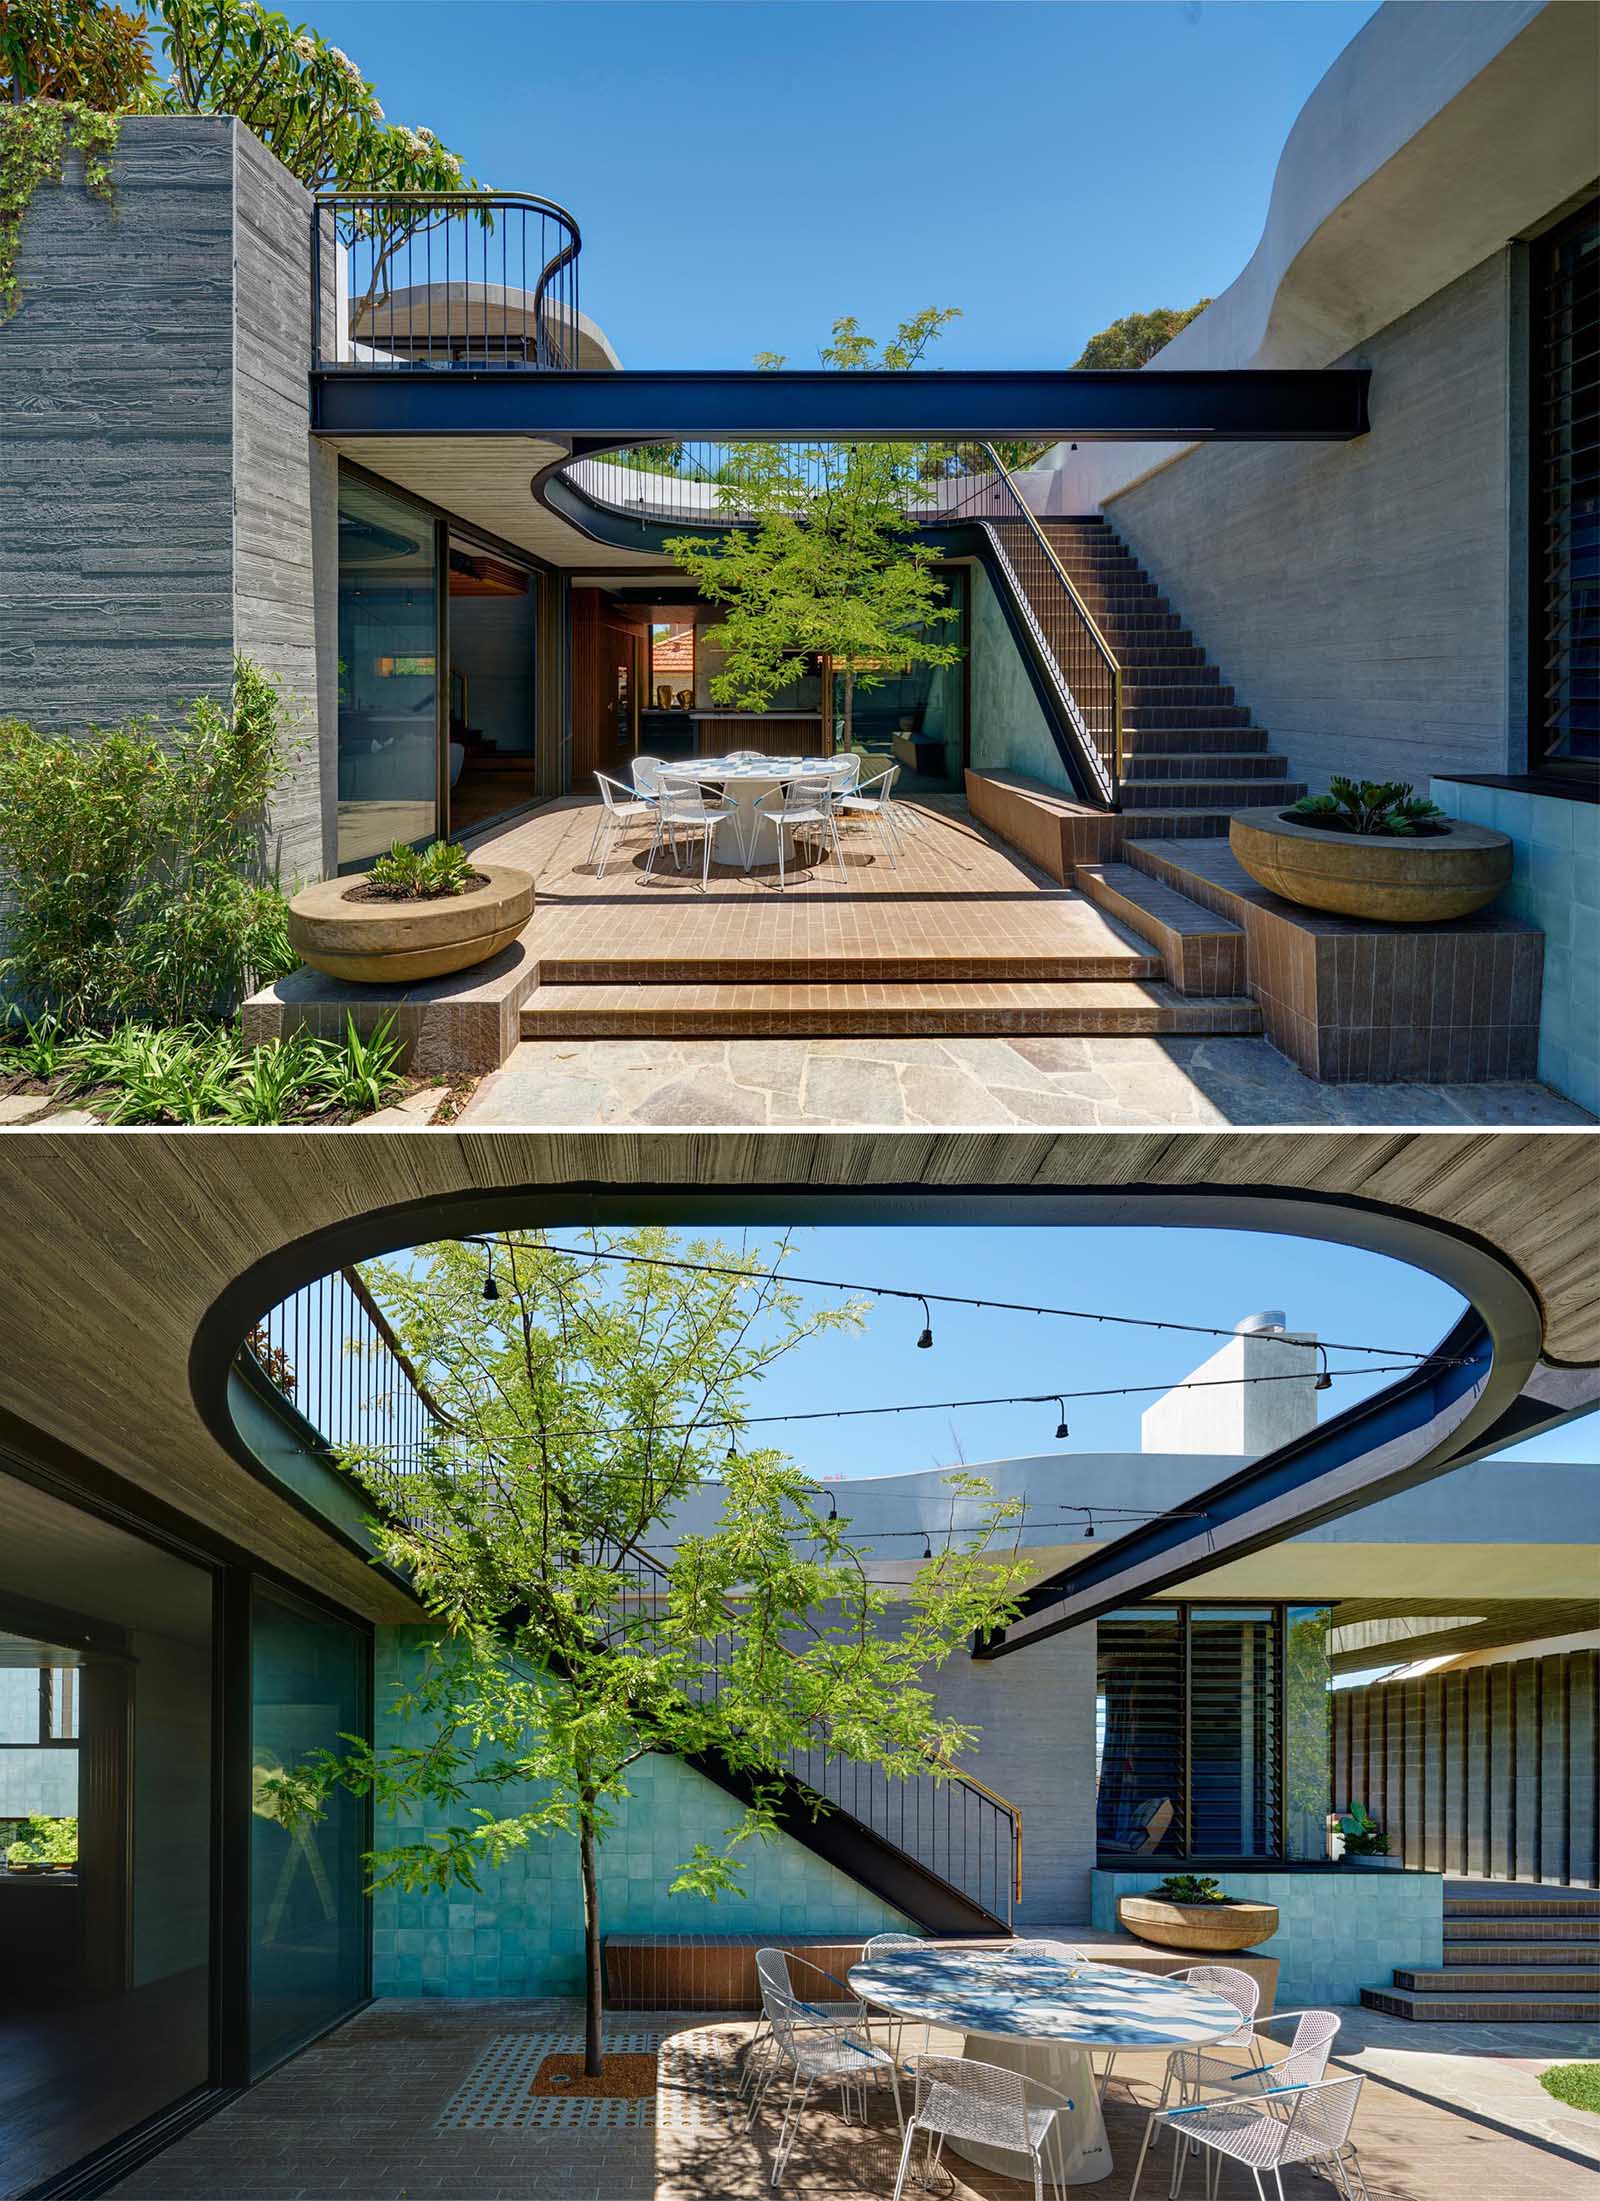 A modern house with a patio designed for outdoor eating.